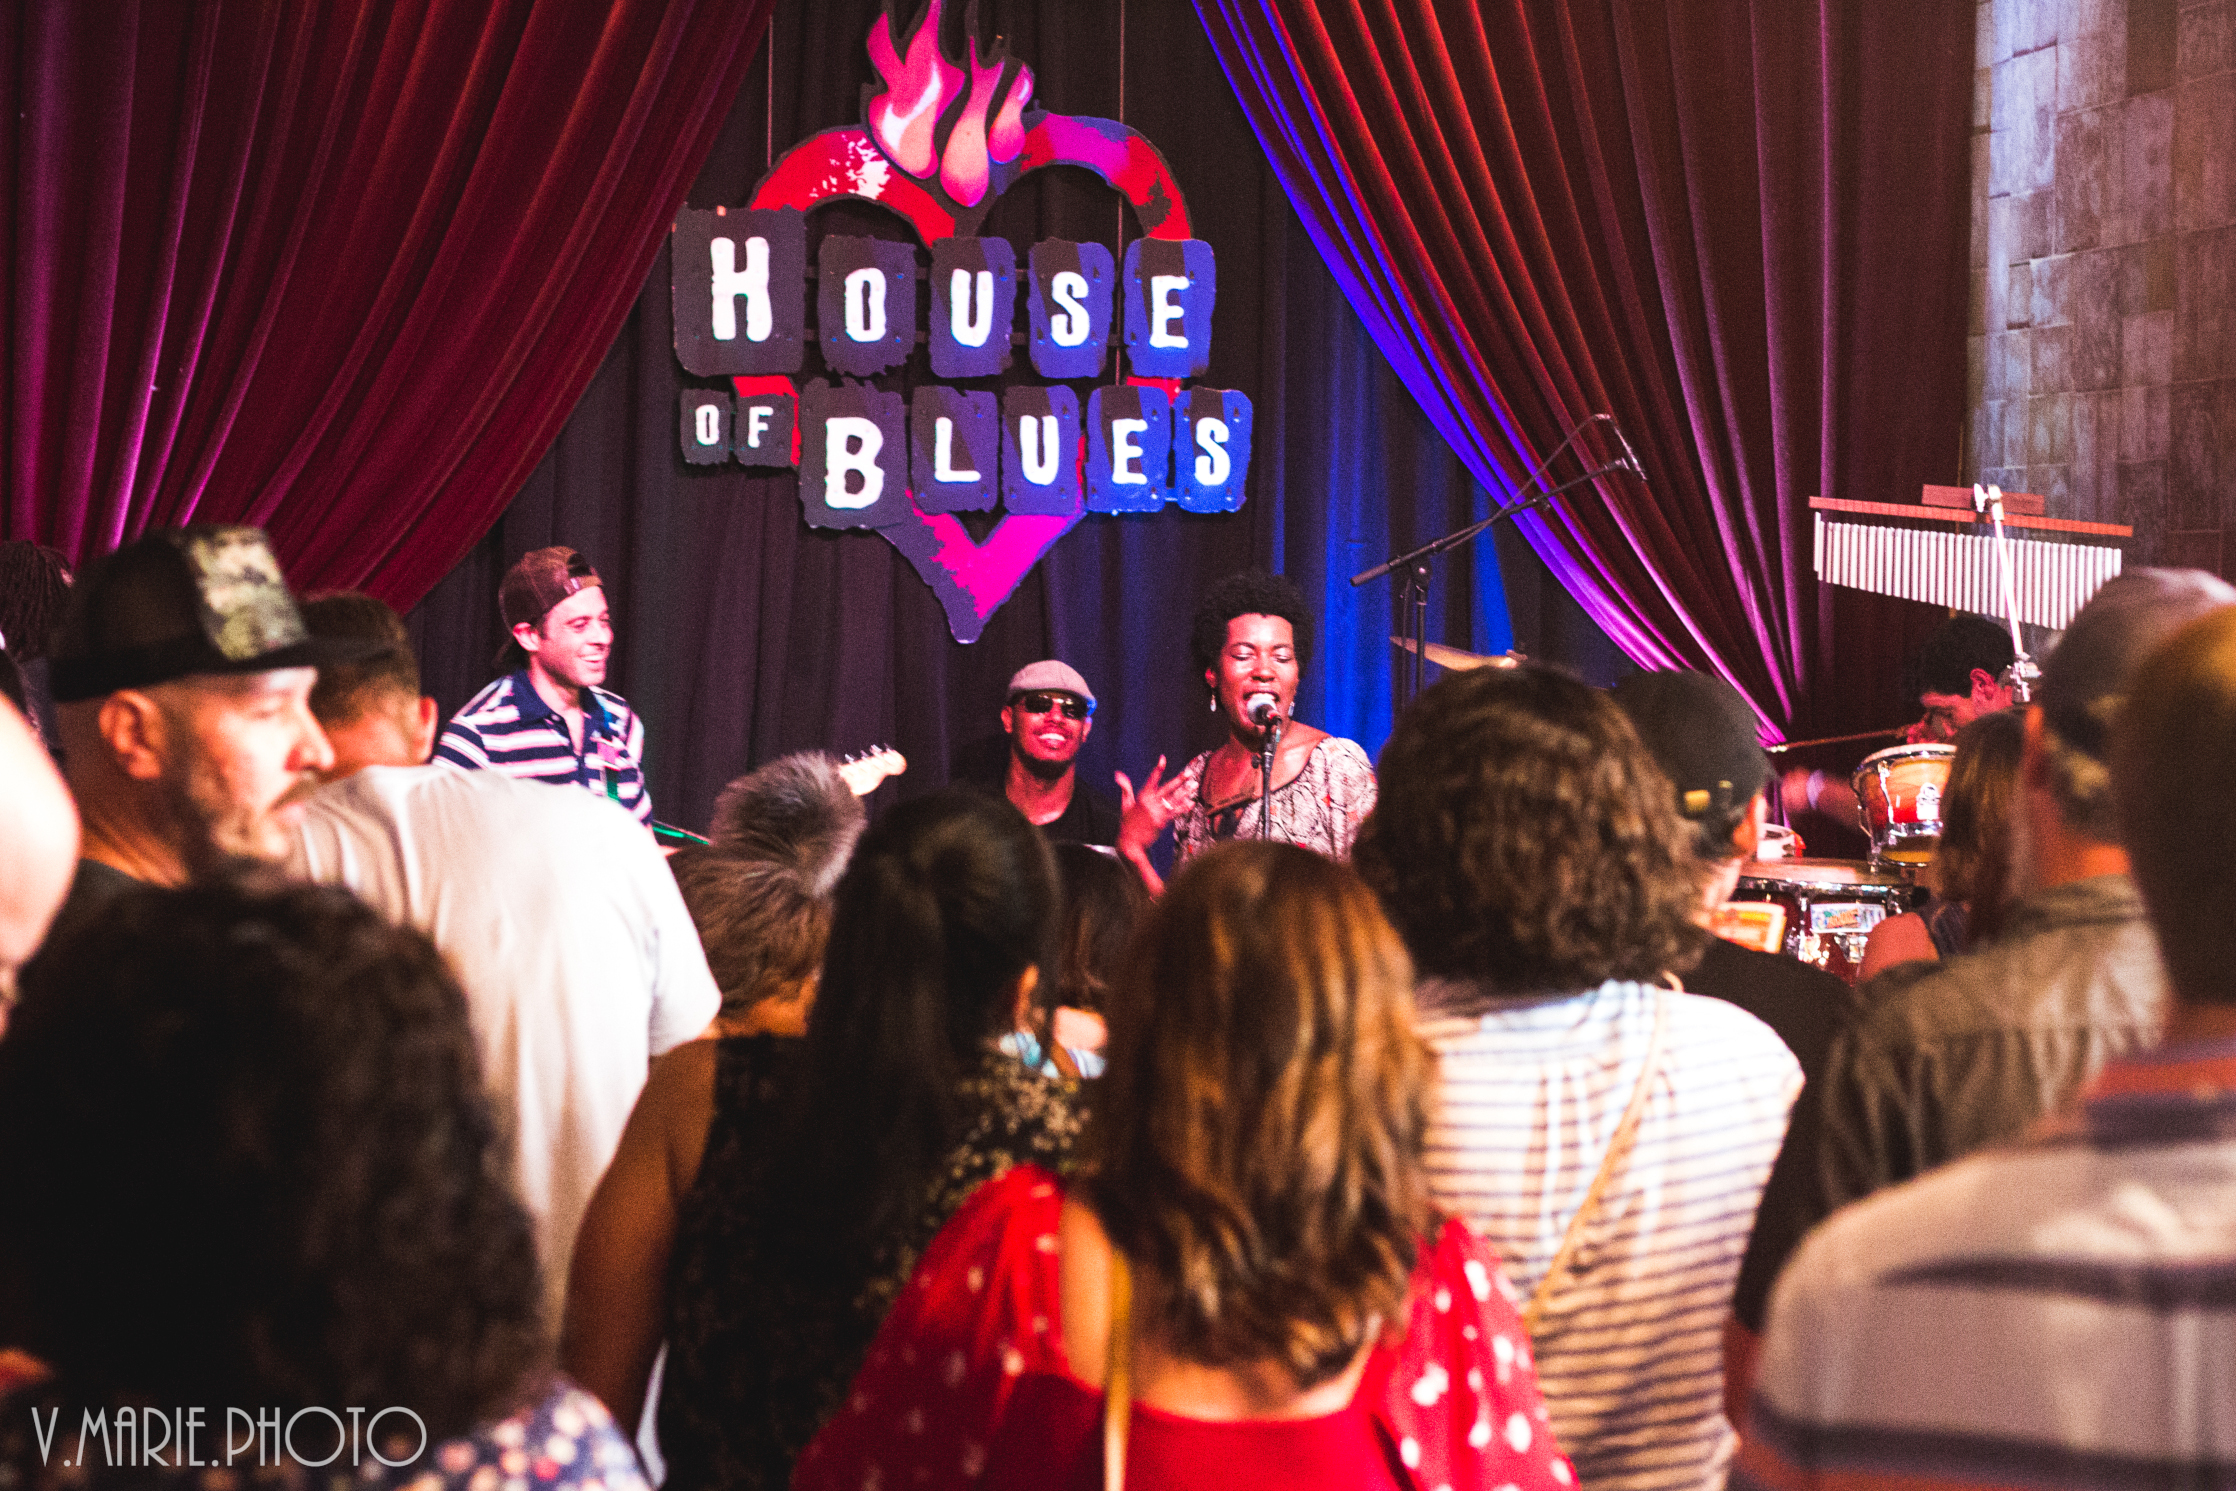 tightn up funk band house of blues local brews local grooves houston texas